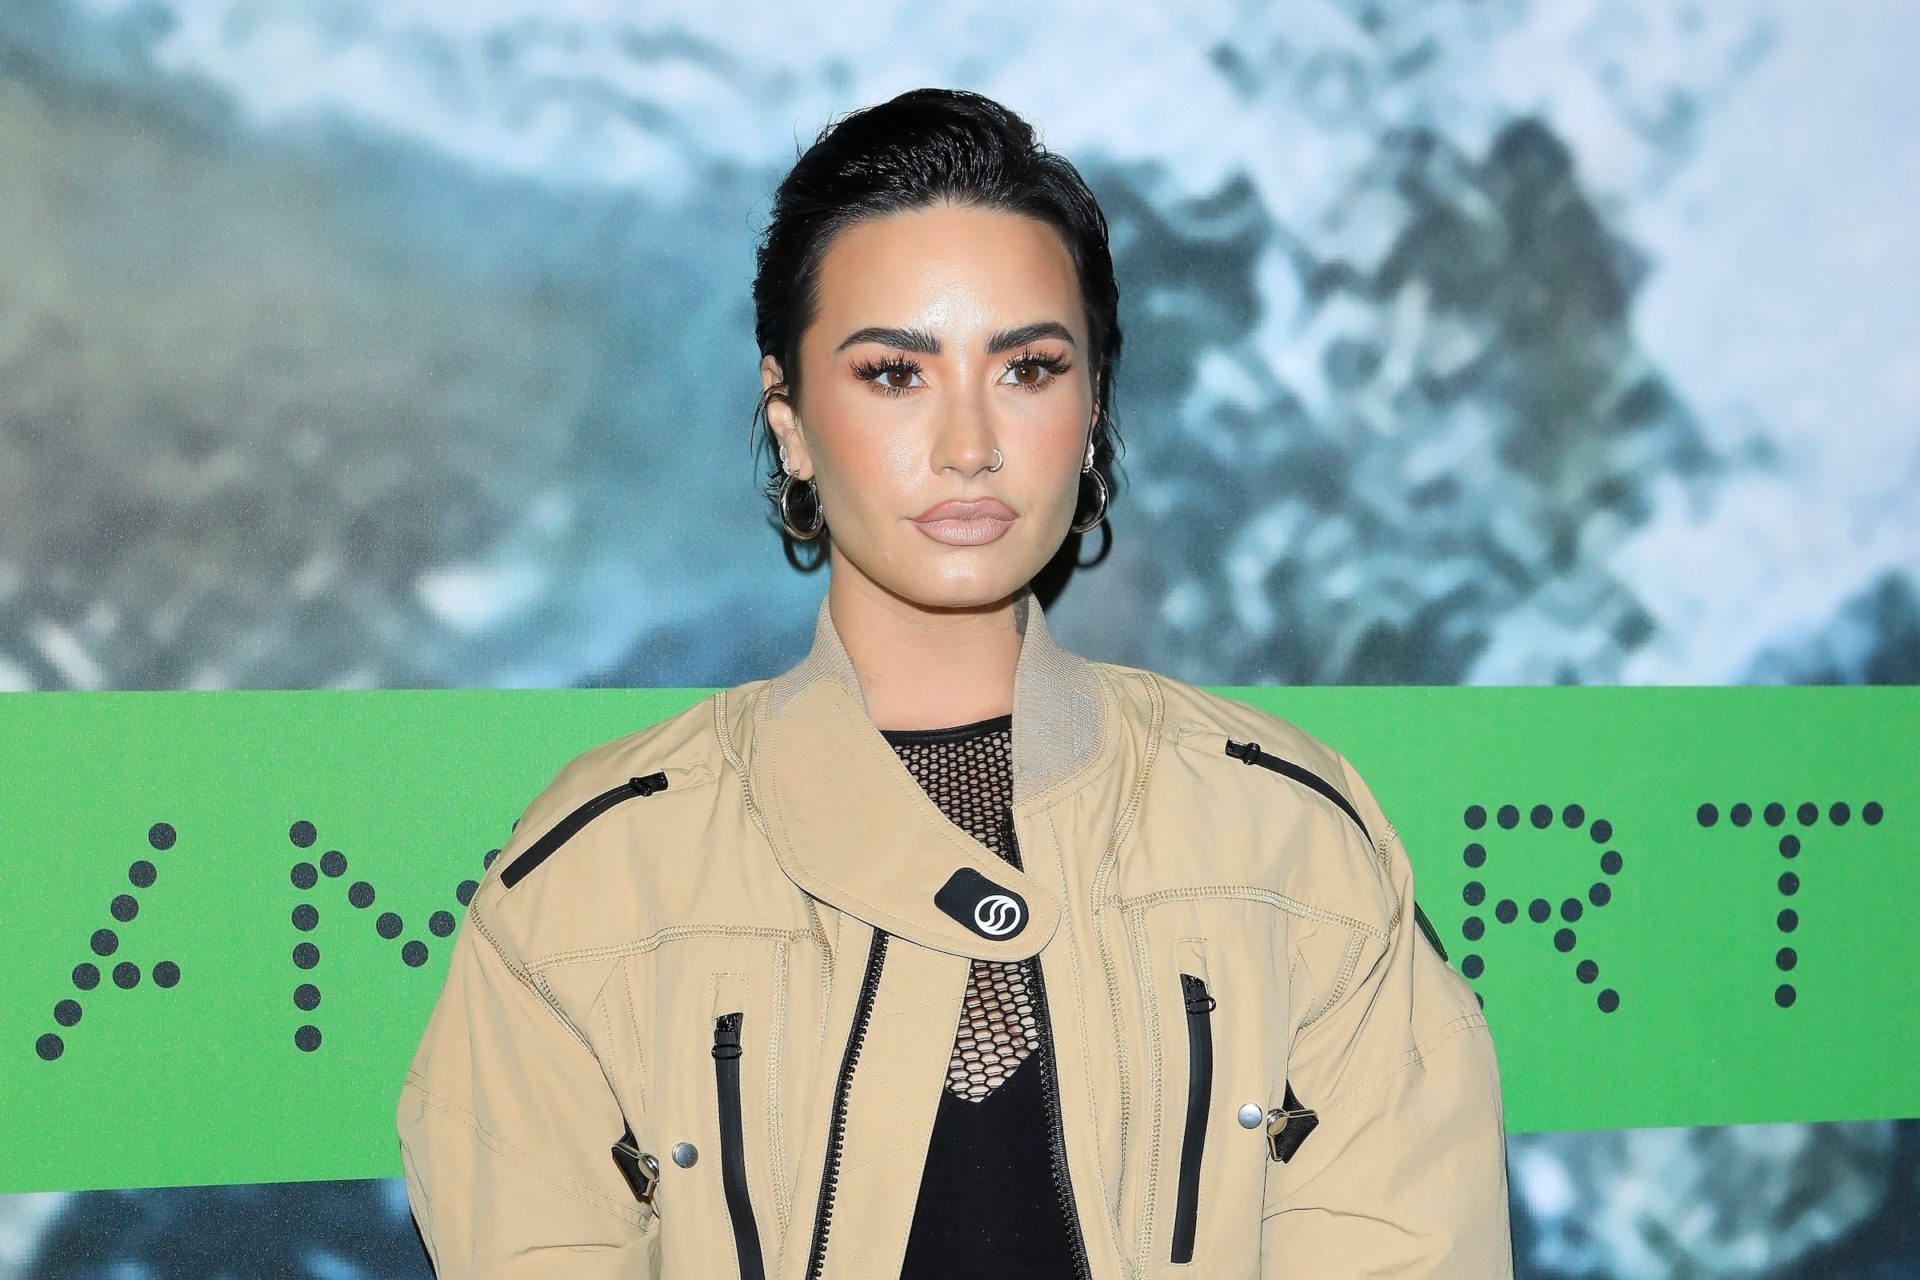 Demi Lovato joins the iconic Scream franchise with a brand new single, “Still Alive,” intended for Scream VI.